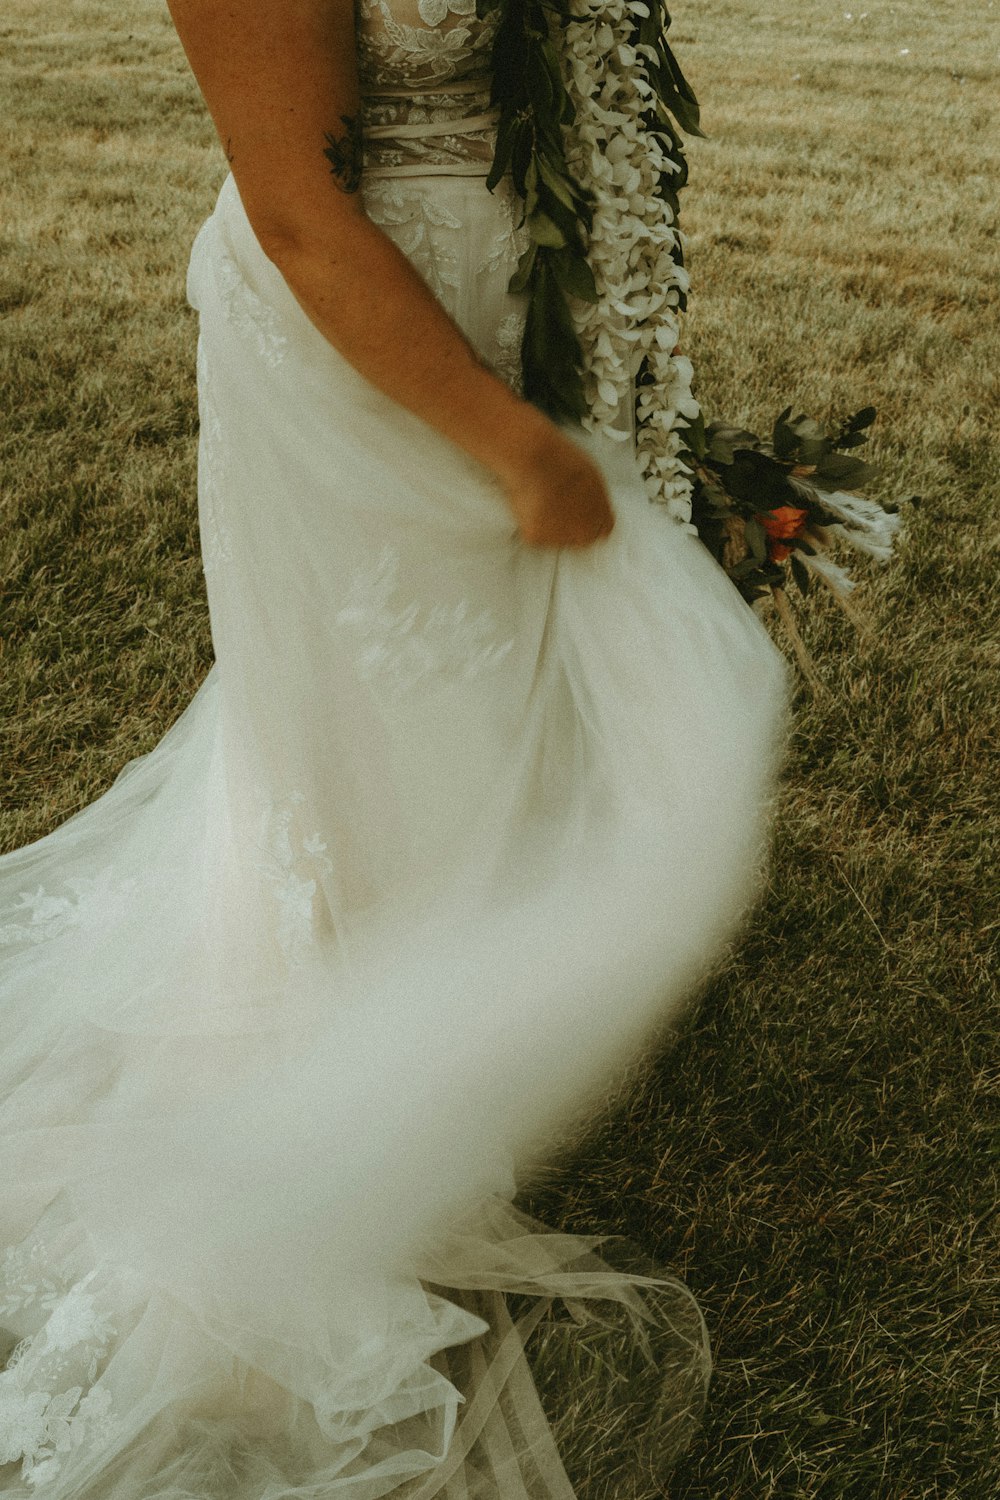 woman in white wedding dress standing on green grass field during daytime